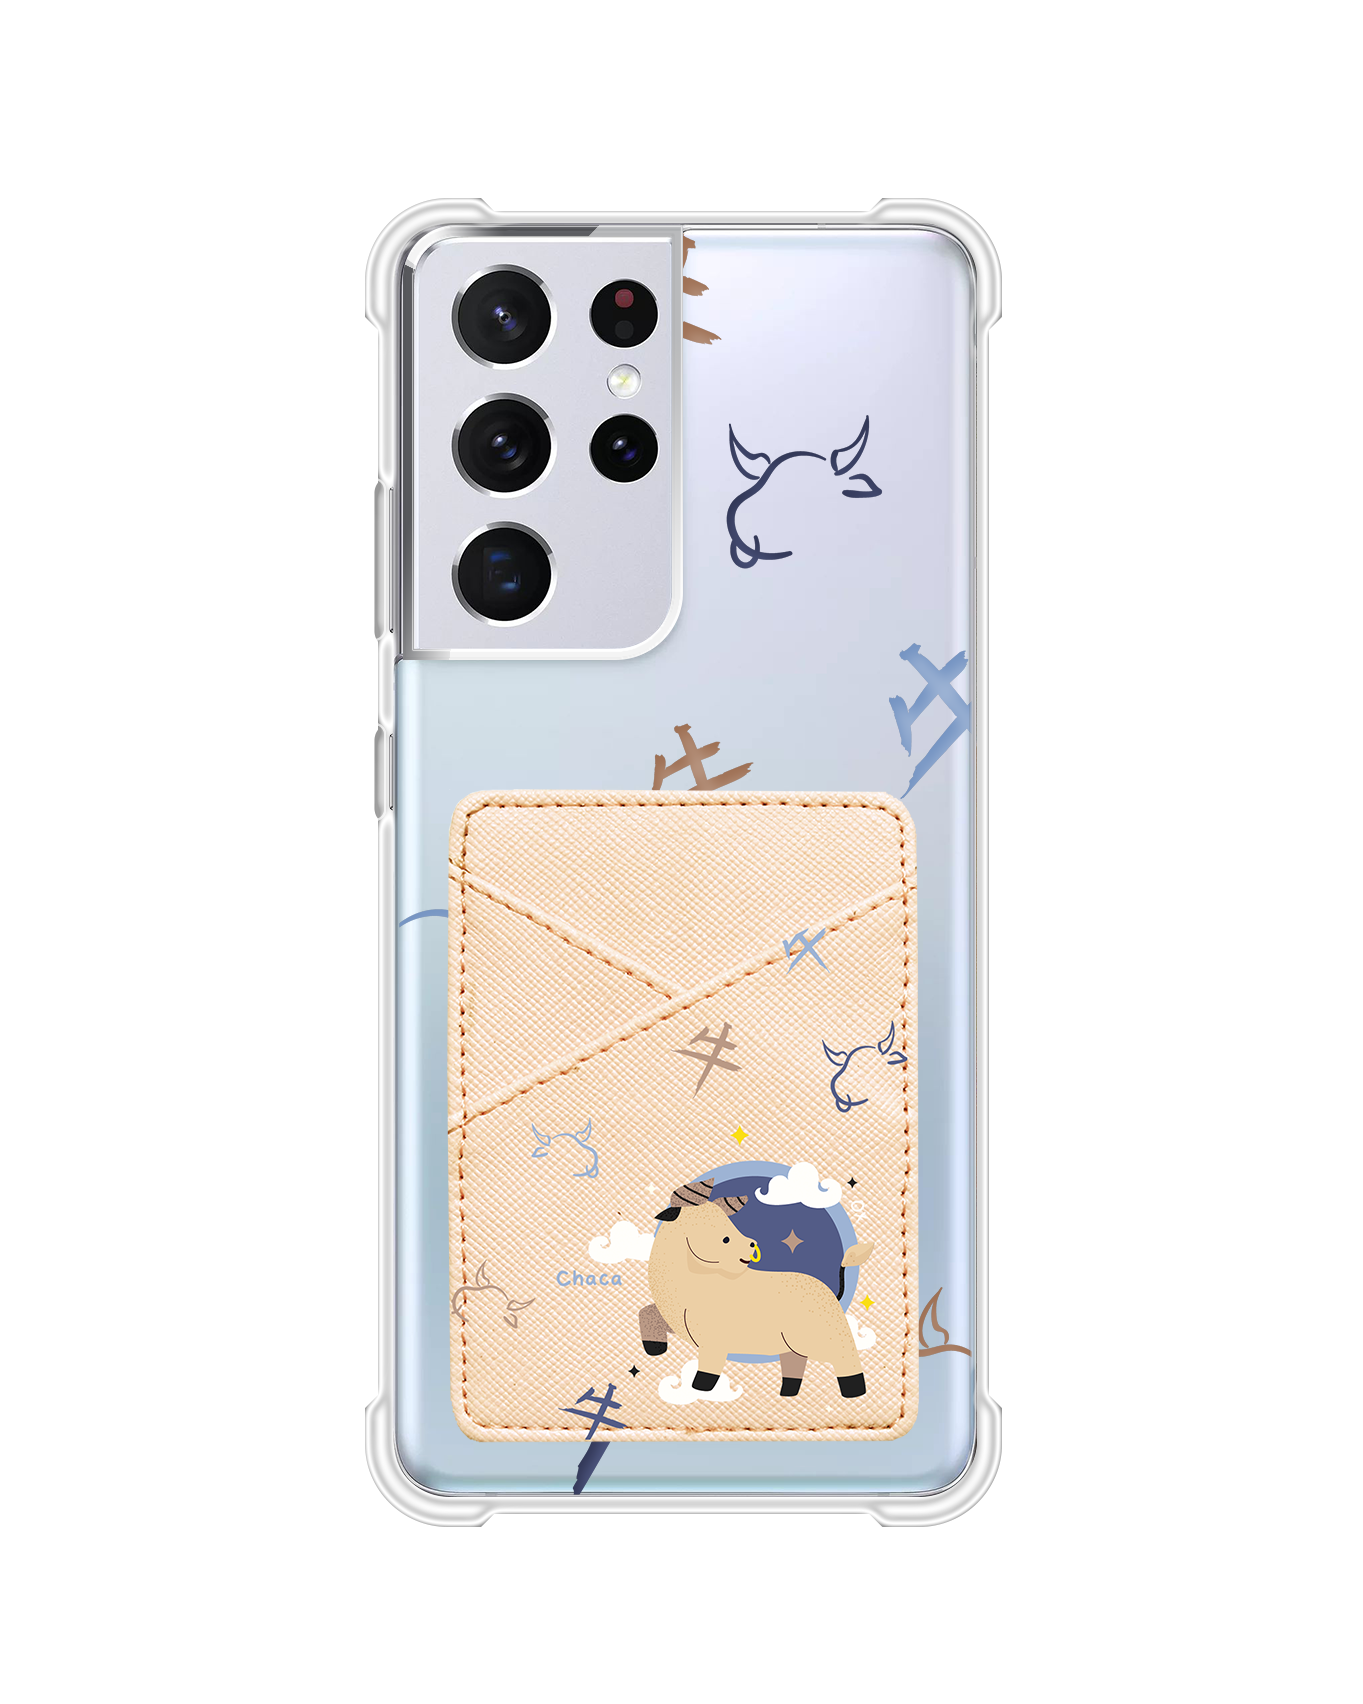 Android Phone Wallet Case - Ox (Chinese Zodiac / Shio)